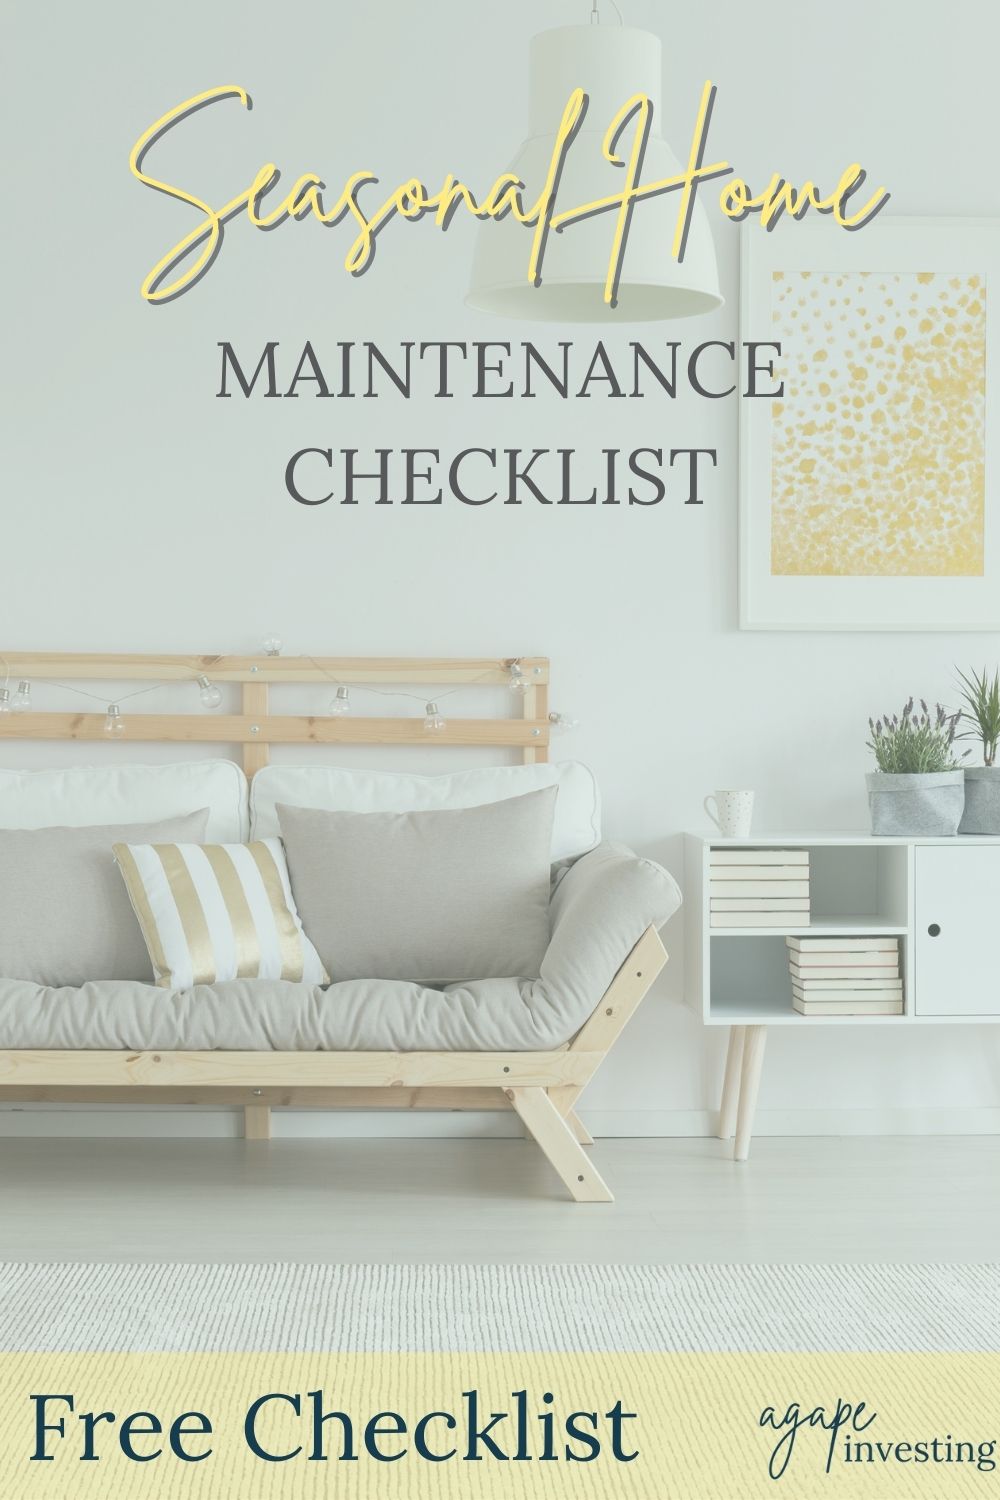 This is the ultimate preventative home maintenance checklist. It will teach you exactly how to take care of your home to keep it happy and healthy for a long time. You will learn why preventative home maintenance is important as well as how often you should perform these tasks. #homemaintenance #diyhomemaintenance #homemaintenancechecklist #maintenancechecklist